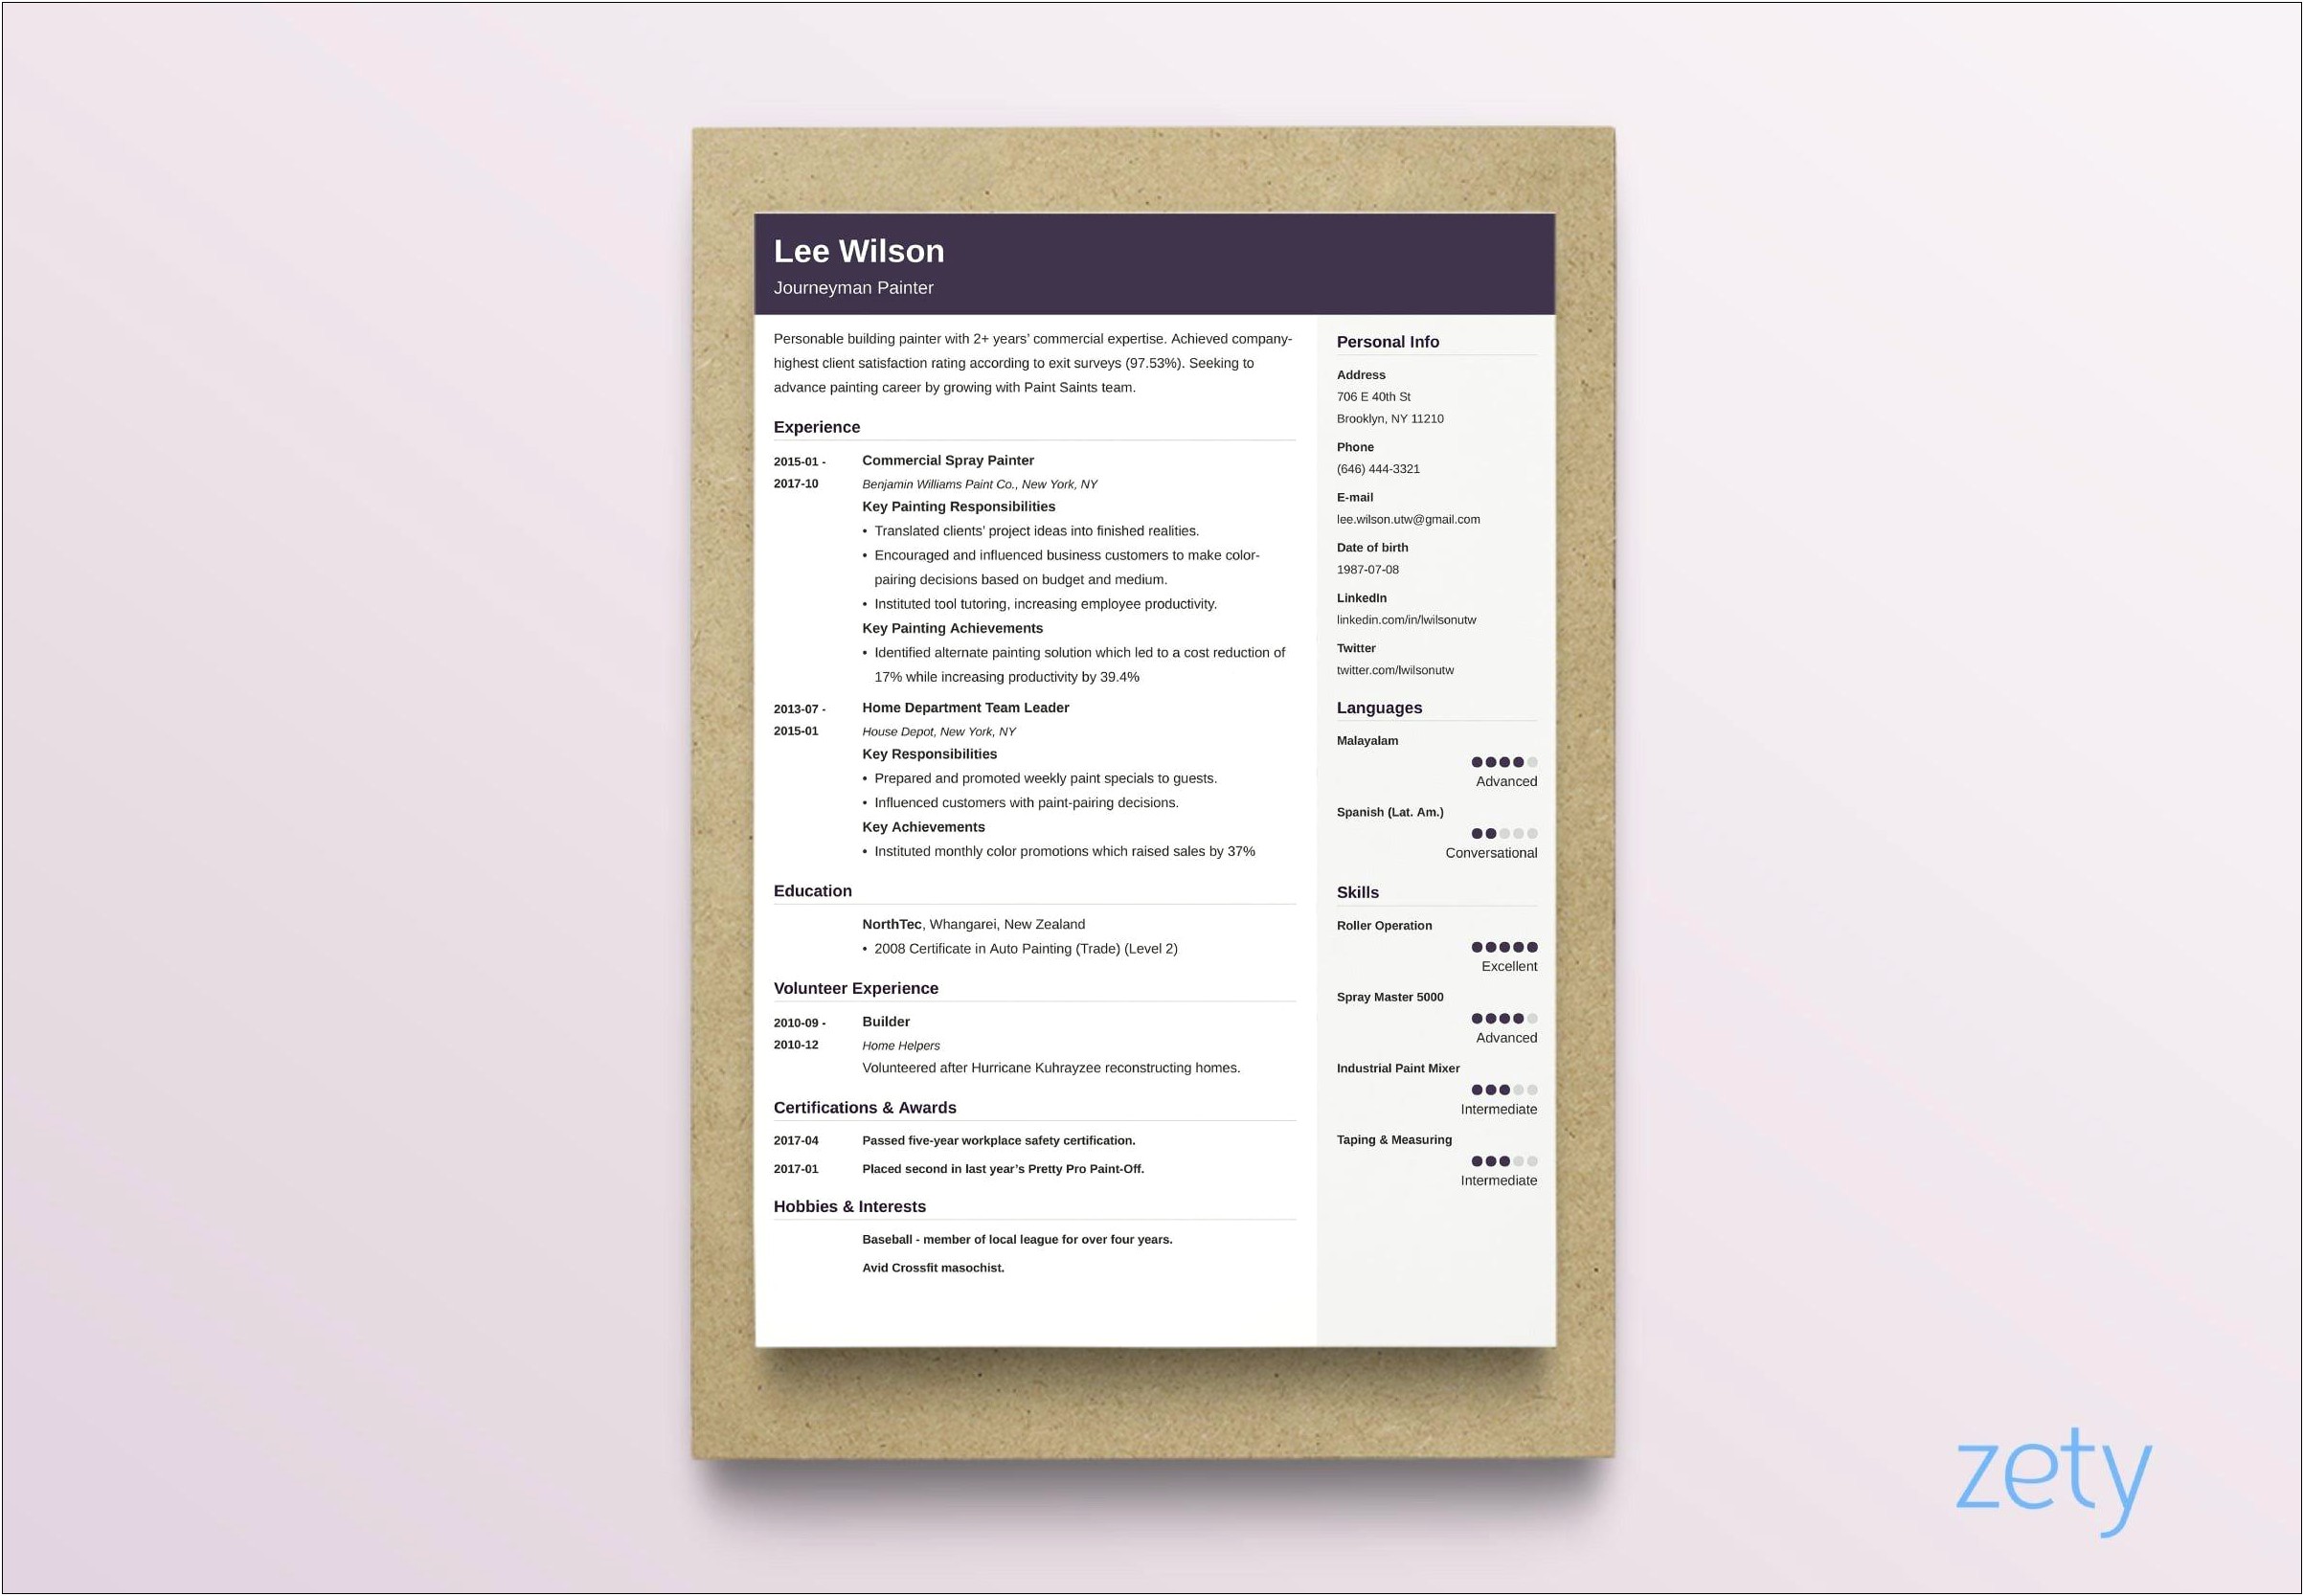 Amazing Resume Bullet Point Examples